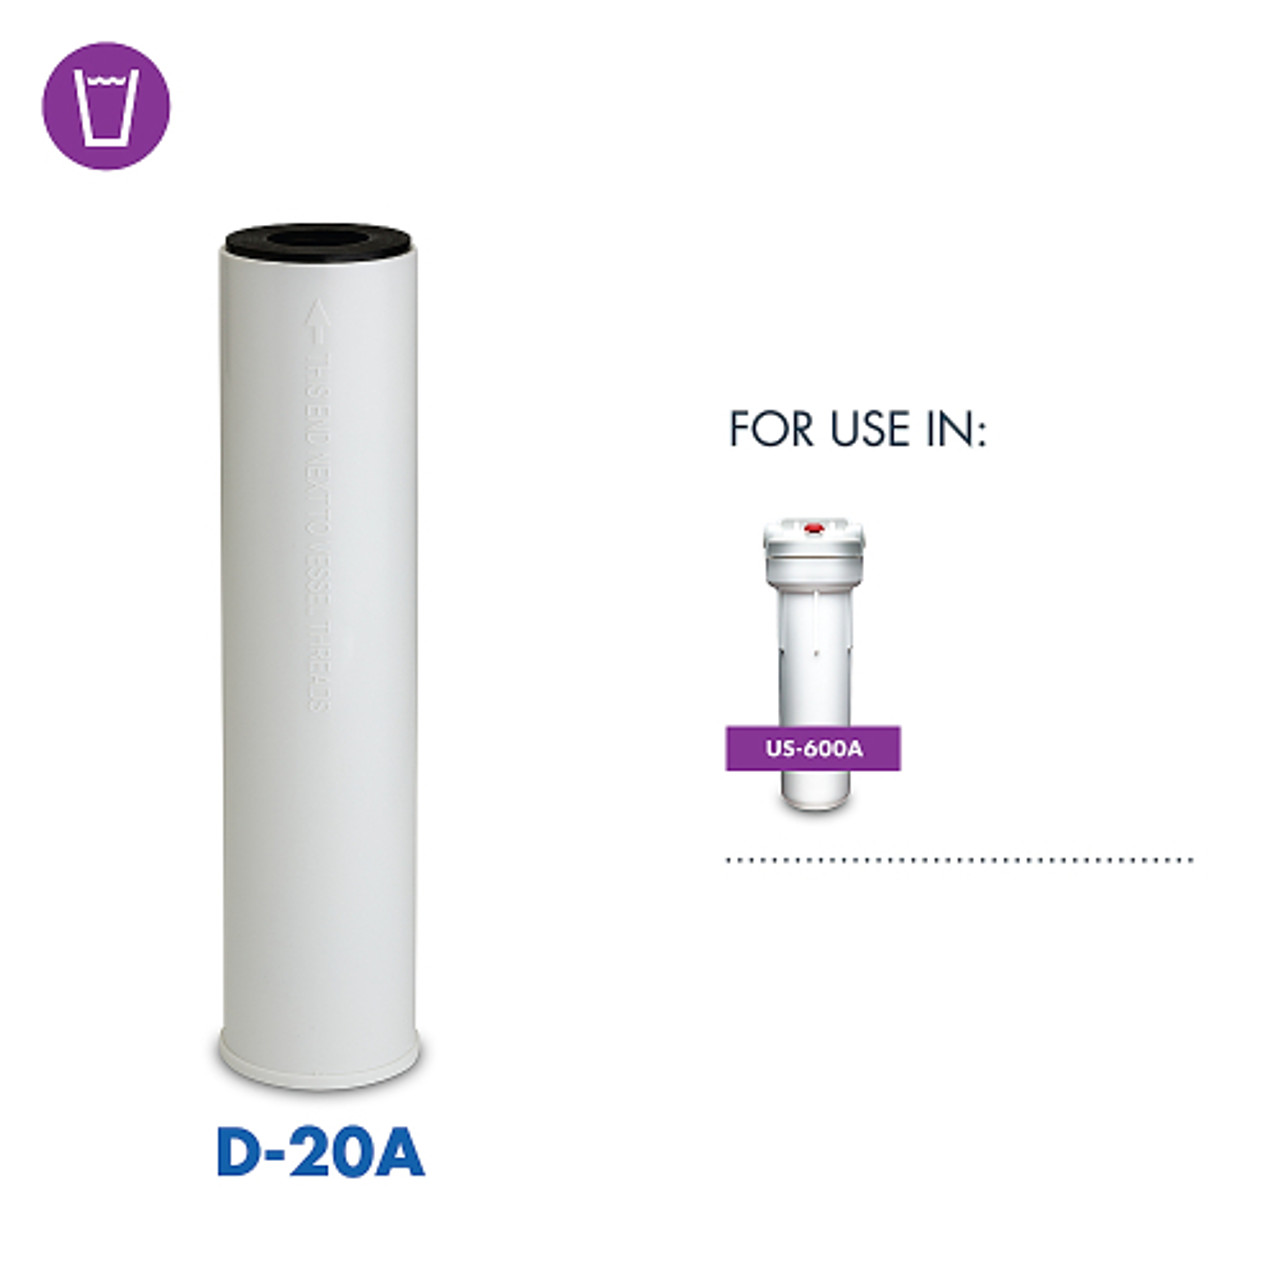 Culligan - Culligan® D-20A Granular-Activated Carbon Drinking Water Filter Replacement Cartridge